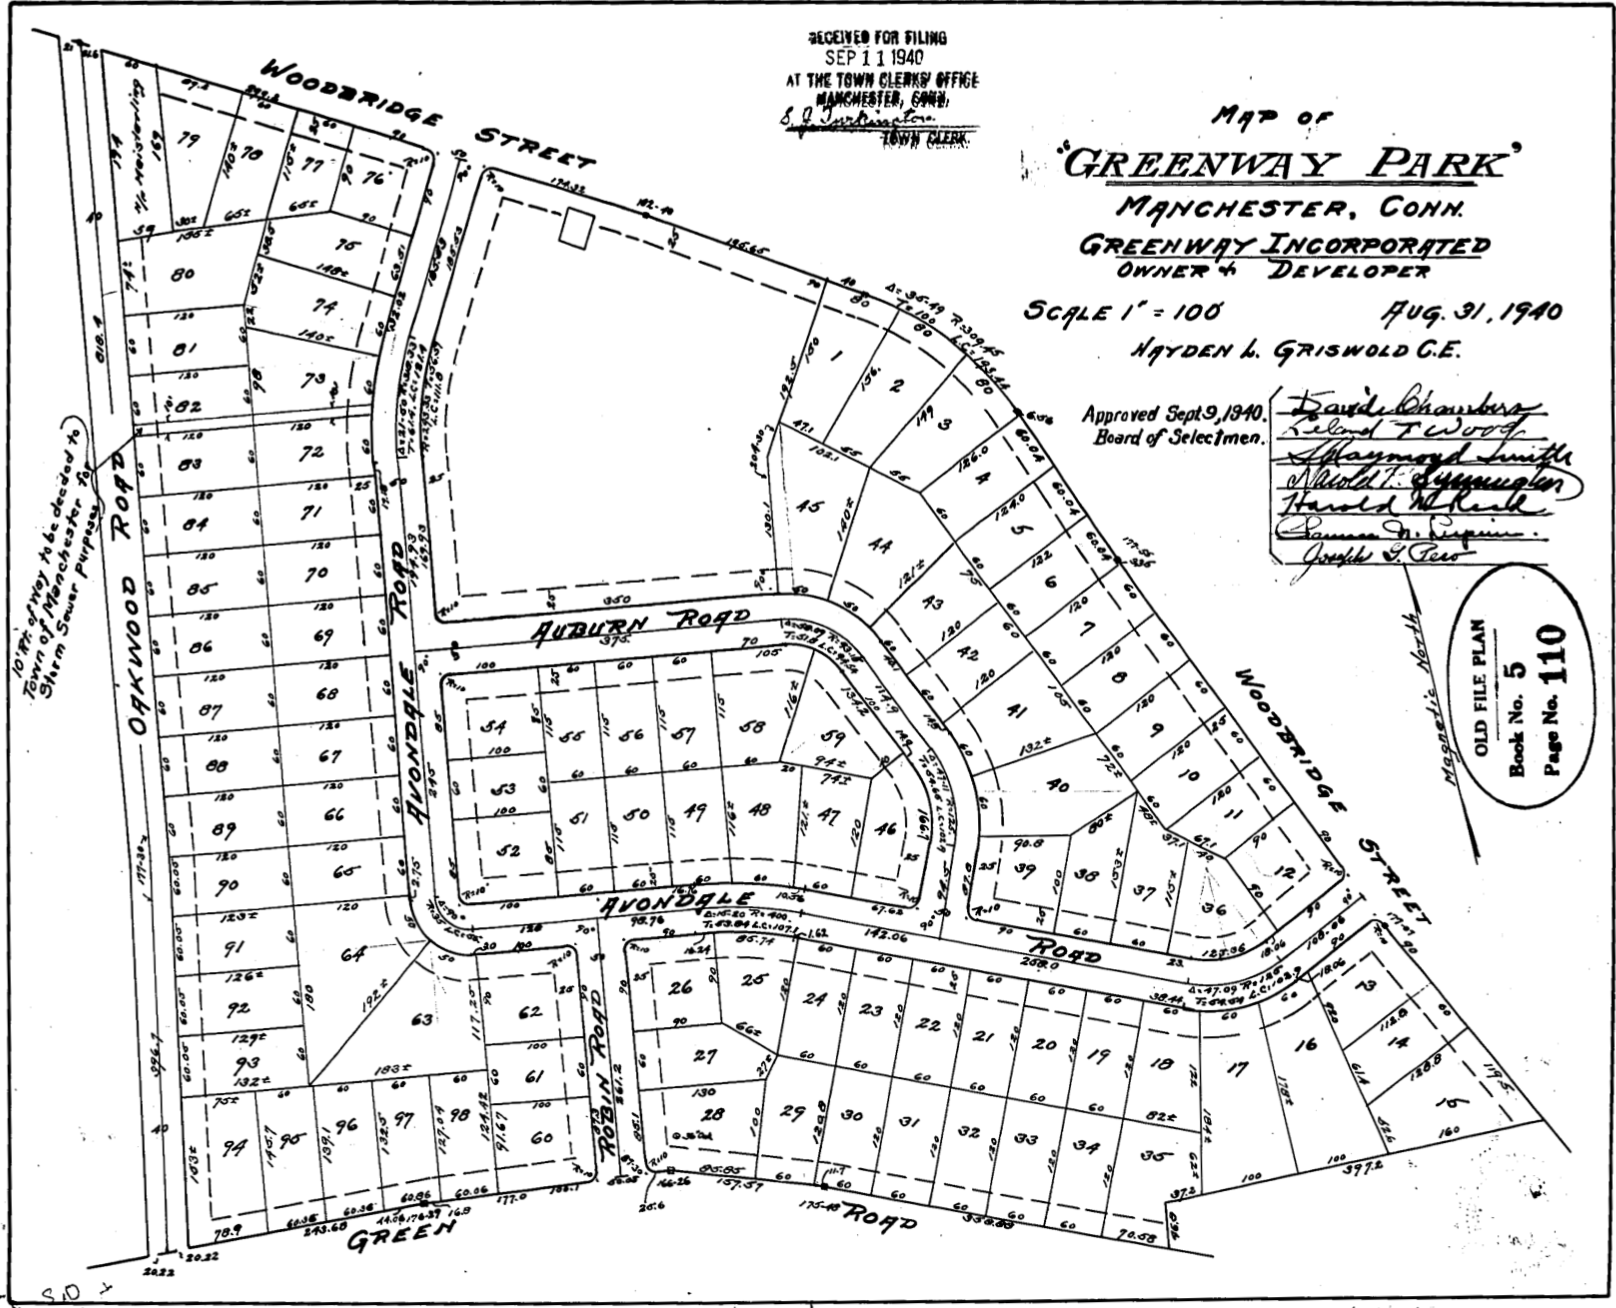 1940 surveyor’s map of Greenway Park housing development, submitted by Greenway Incorporated and approved by the Town of Manchester, Connecticut.